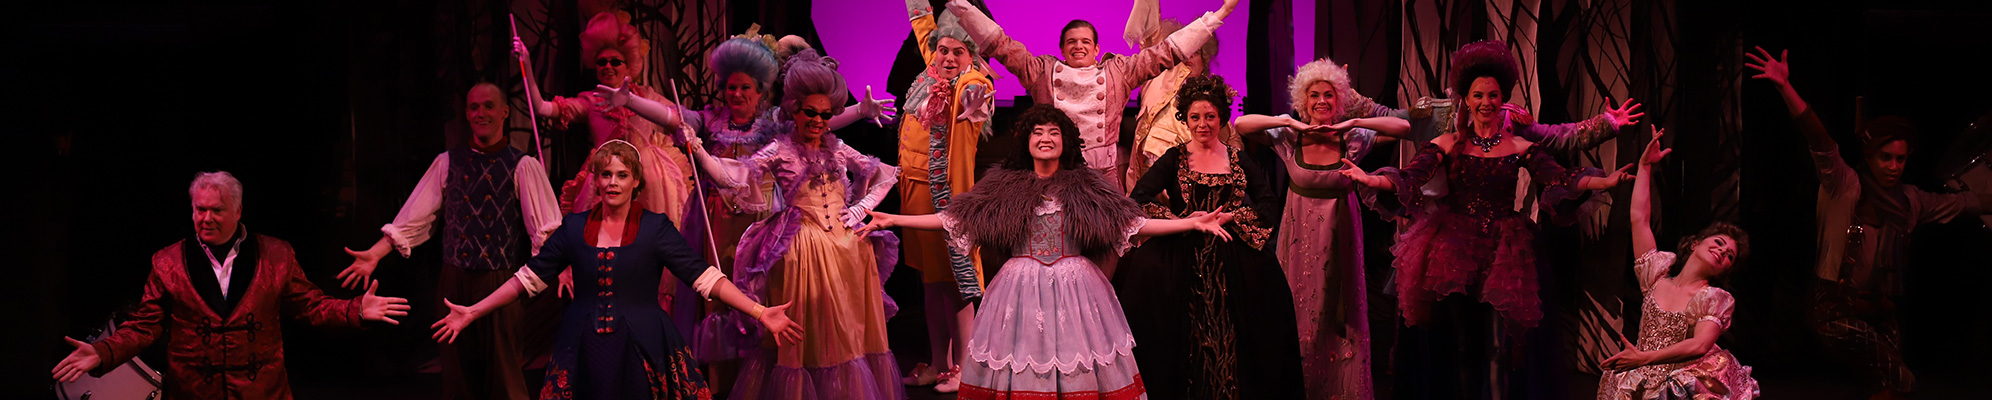 Photo of the cast from Broadway Rose Theatre's "Into the Woods"